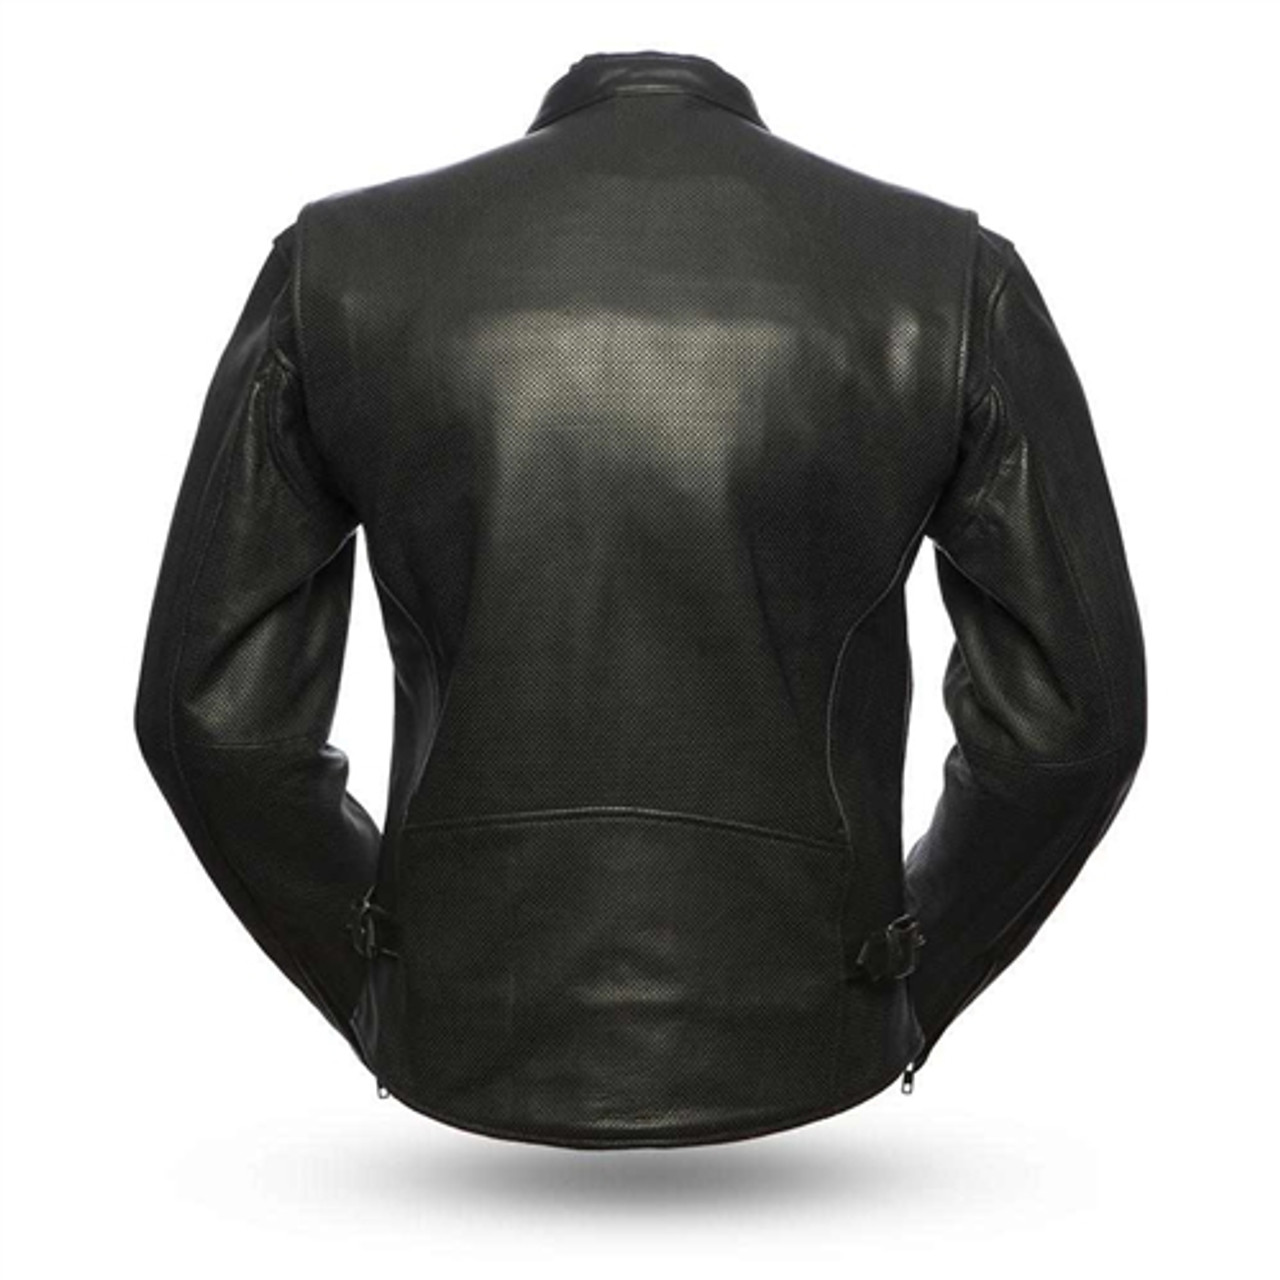 First Classics Men's Perforated Leather Motorcycle Jacket, Lightweight